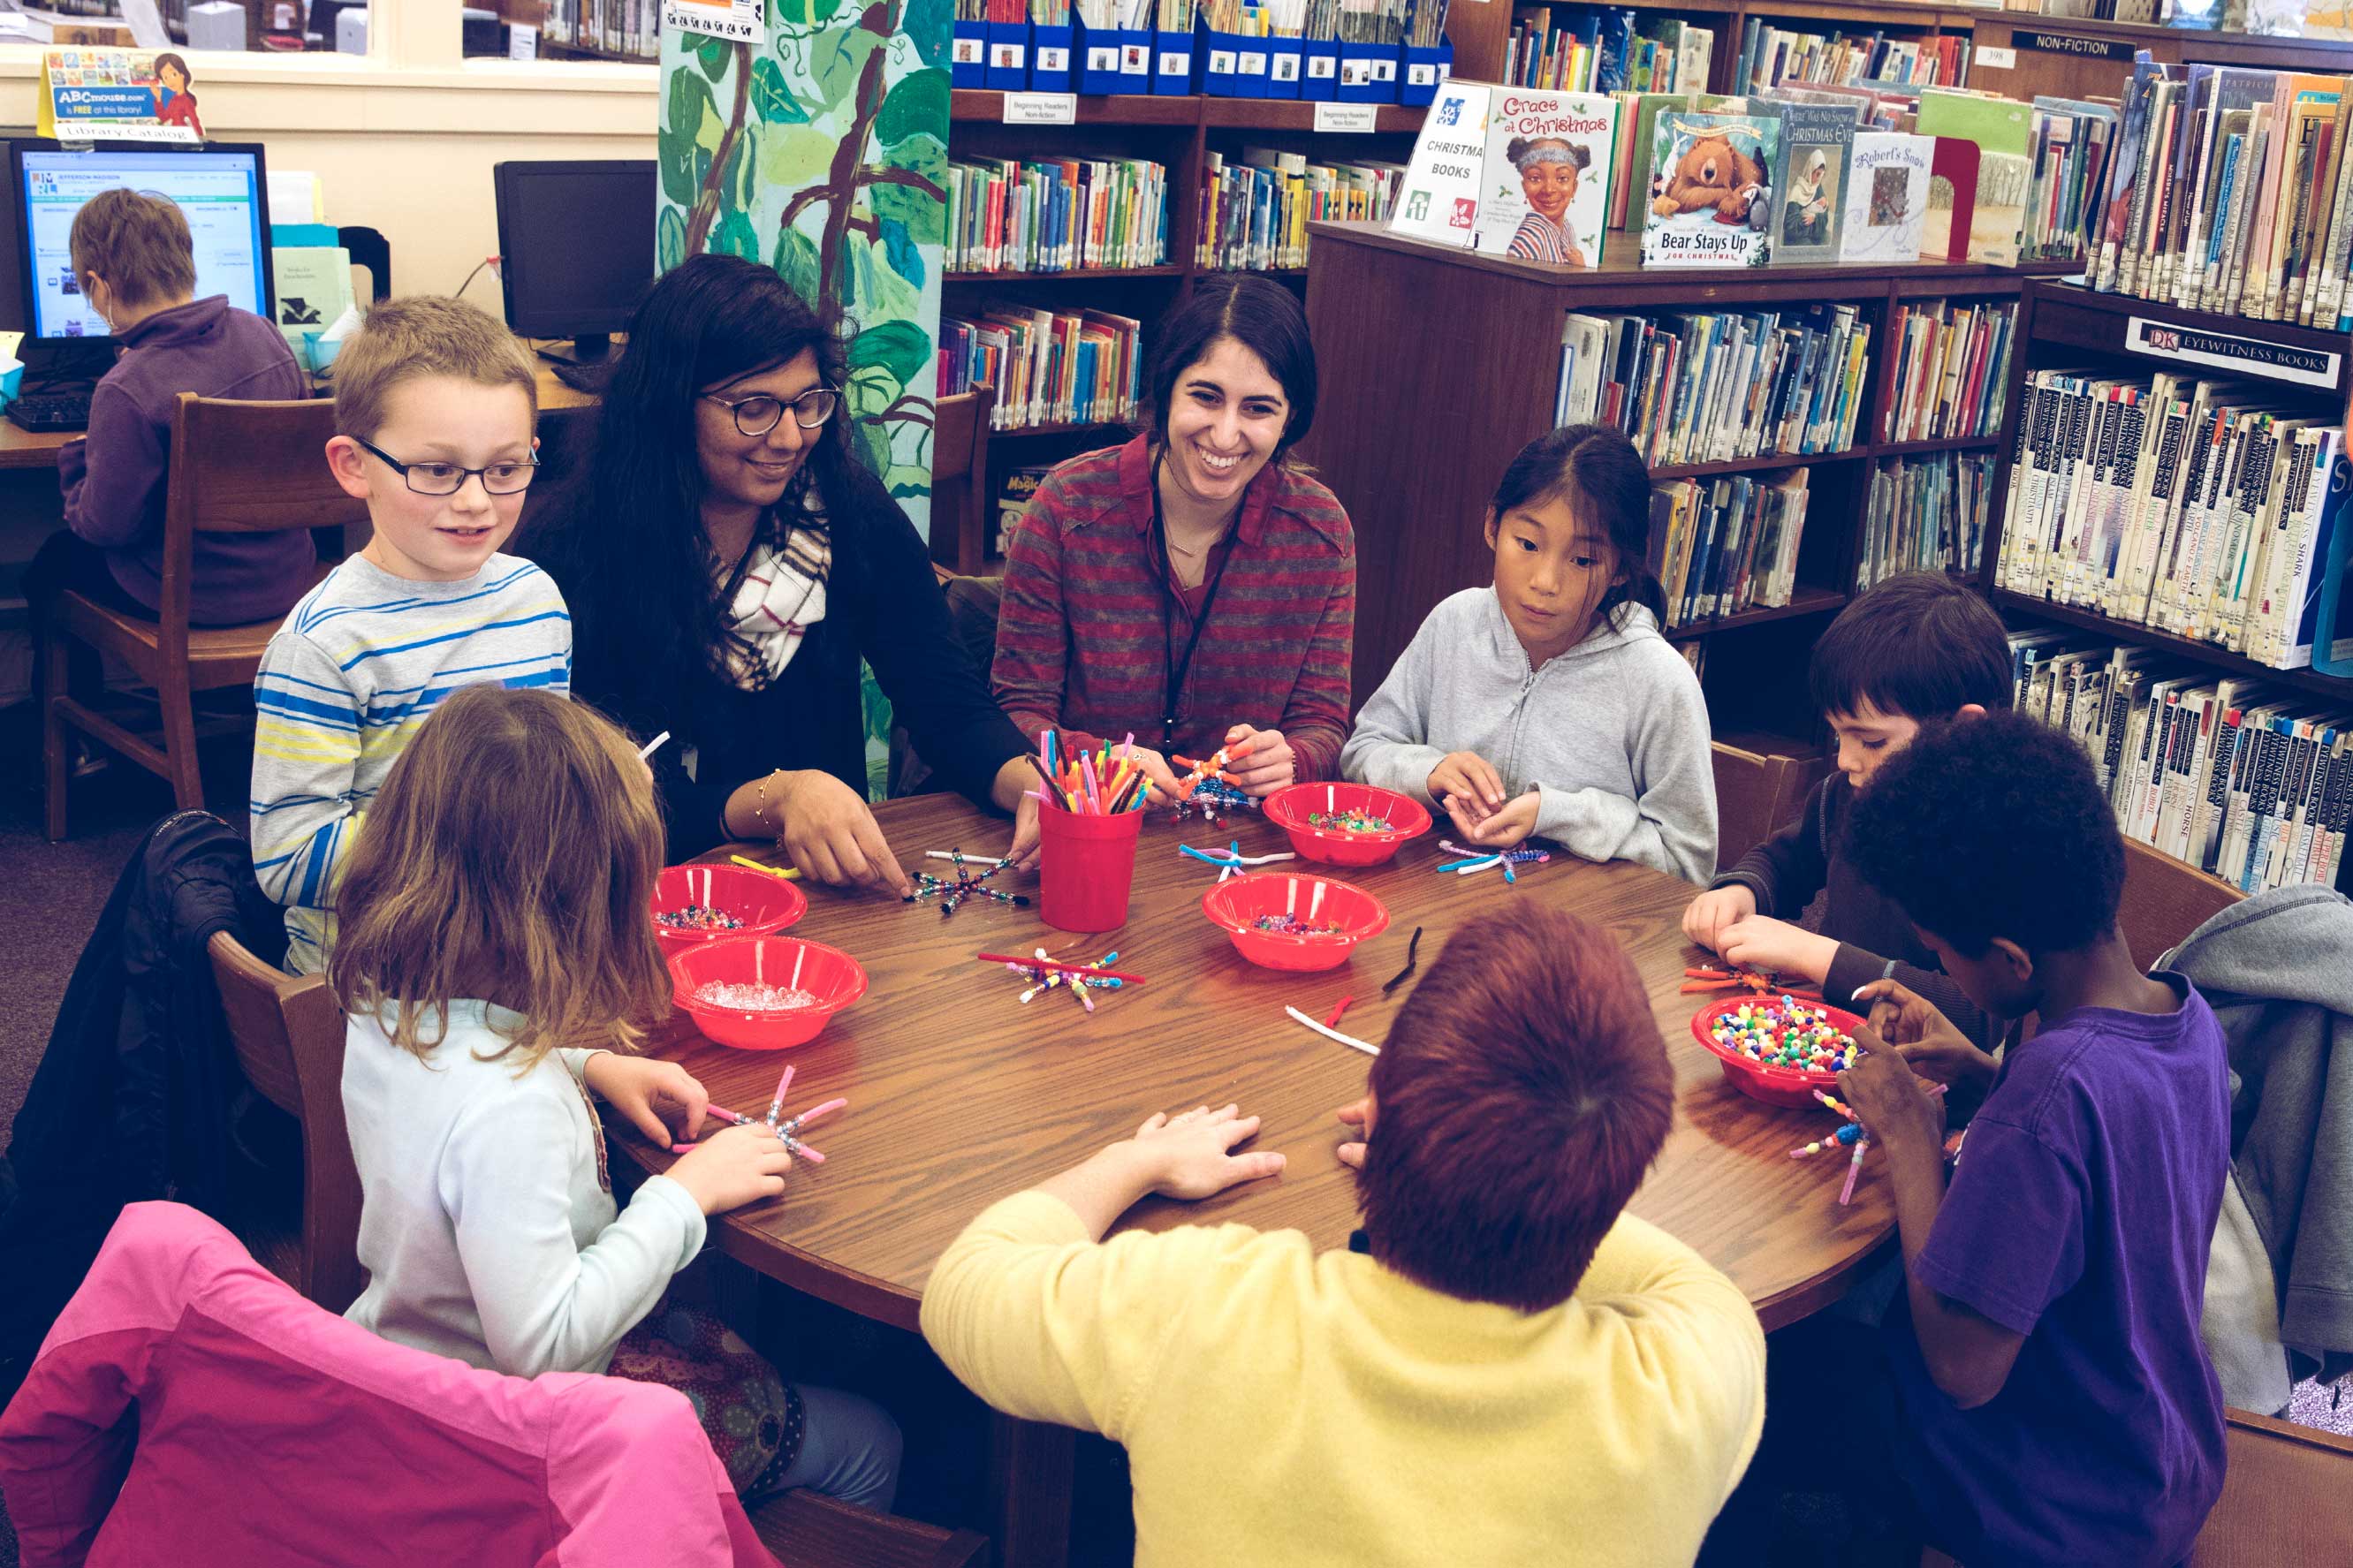 Lajja Patel, and Darya Tahan, work with children on creative projects at a table